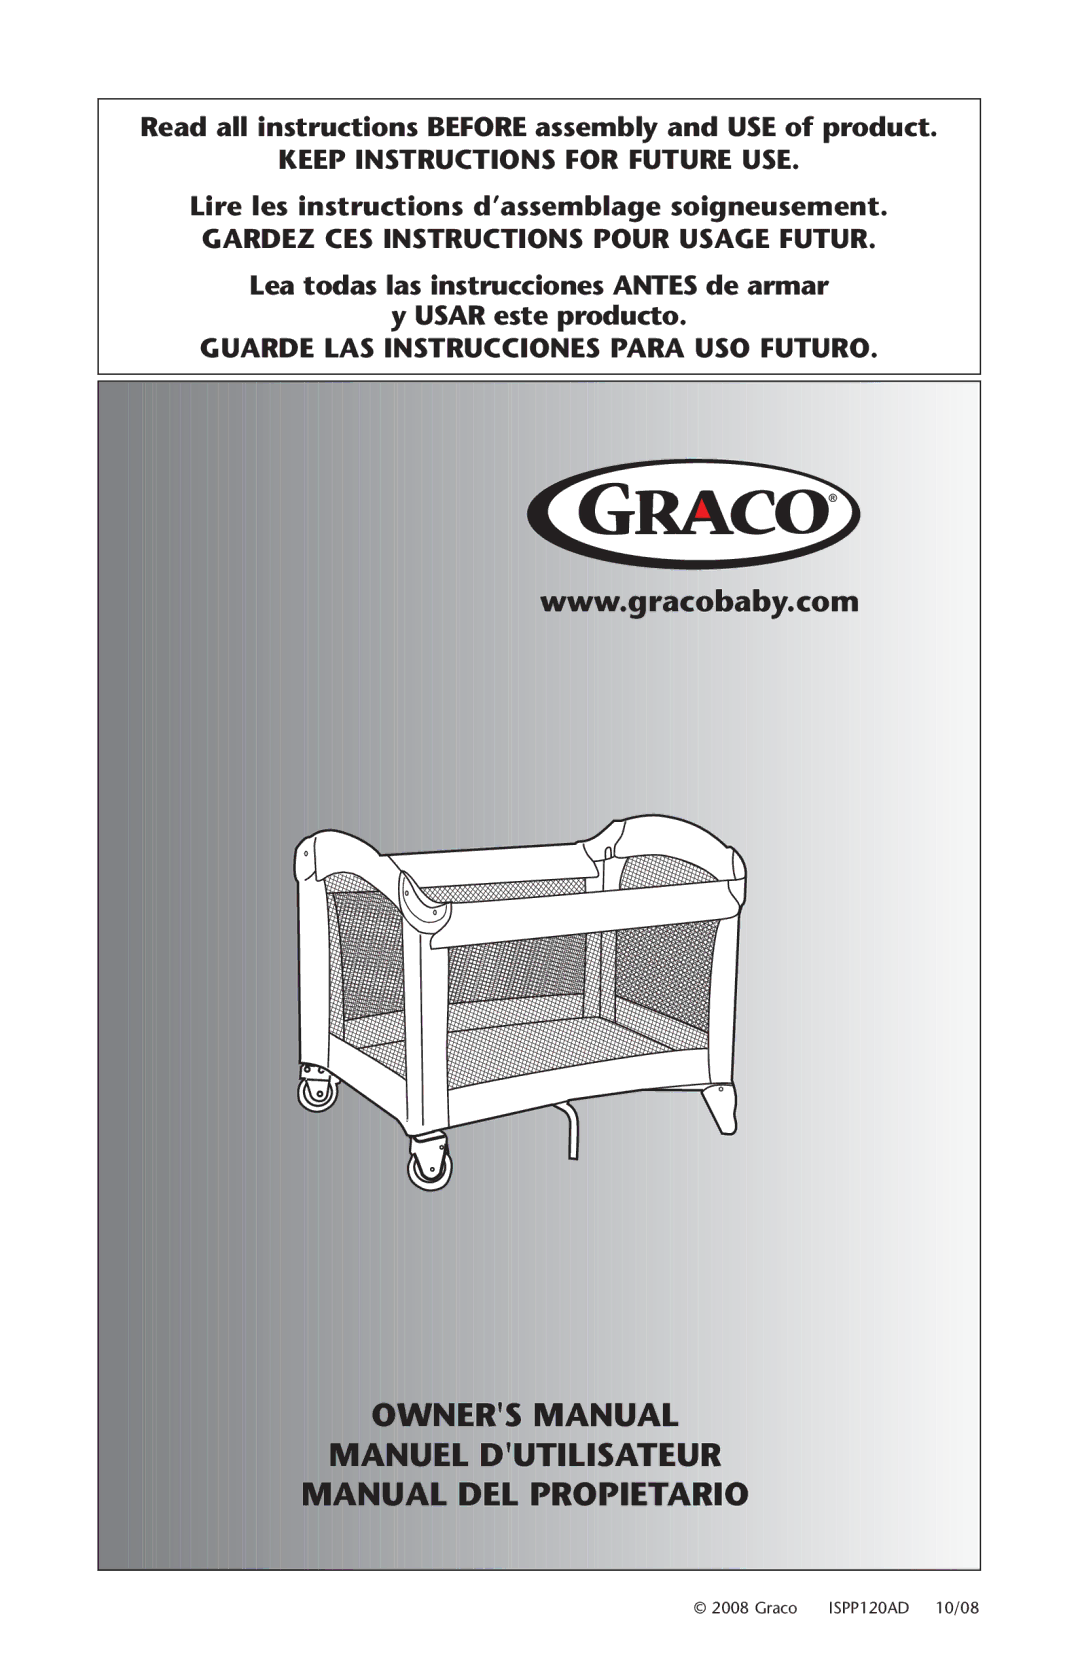 Graco 1751557, ISPP120AD owner manual Read all instructions Before assembly and USE of product 